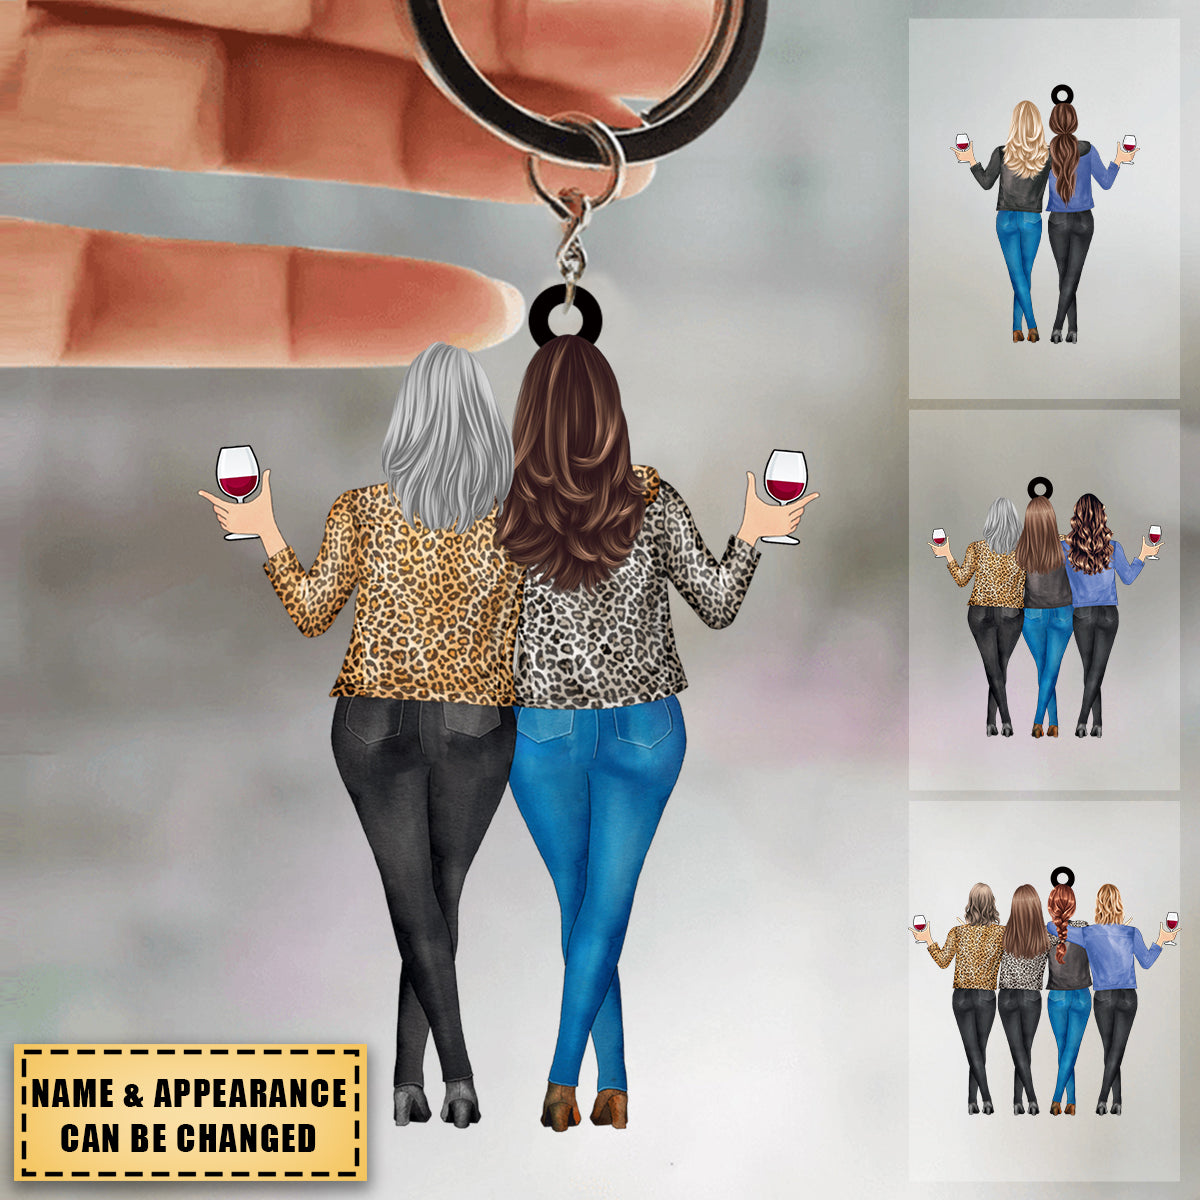 Besties, Tolerating, Bonding Over, Keeping Each Other Sane - Personalized Keychain